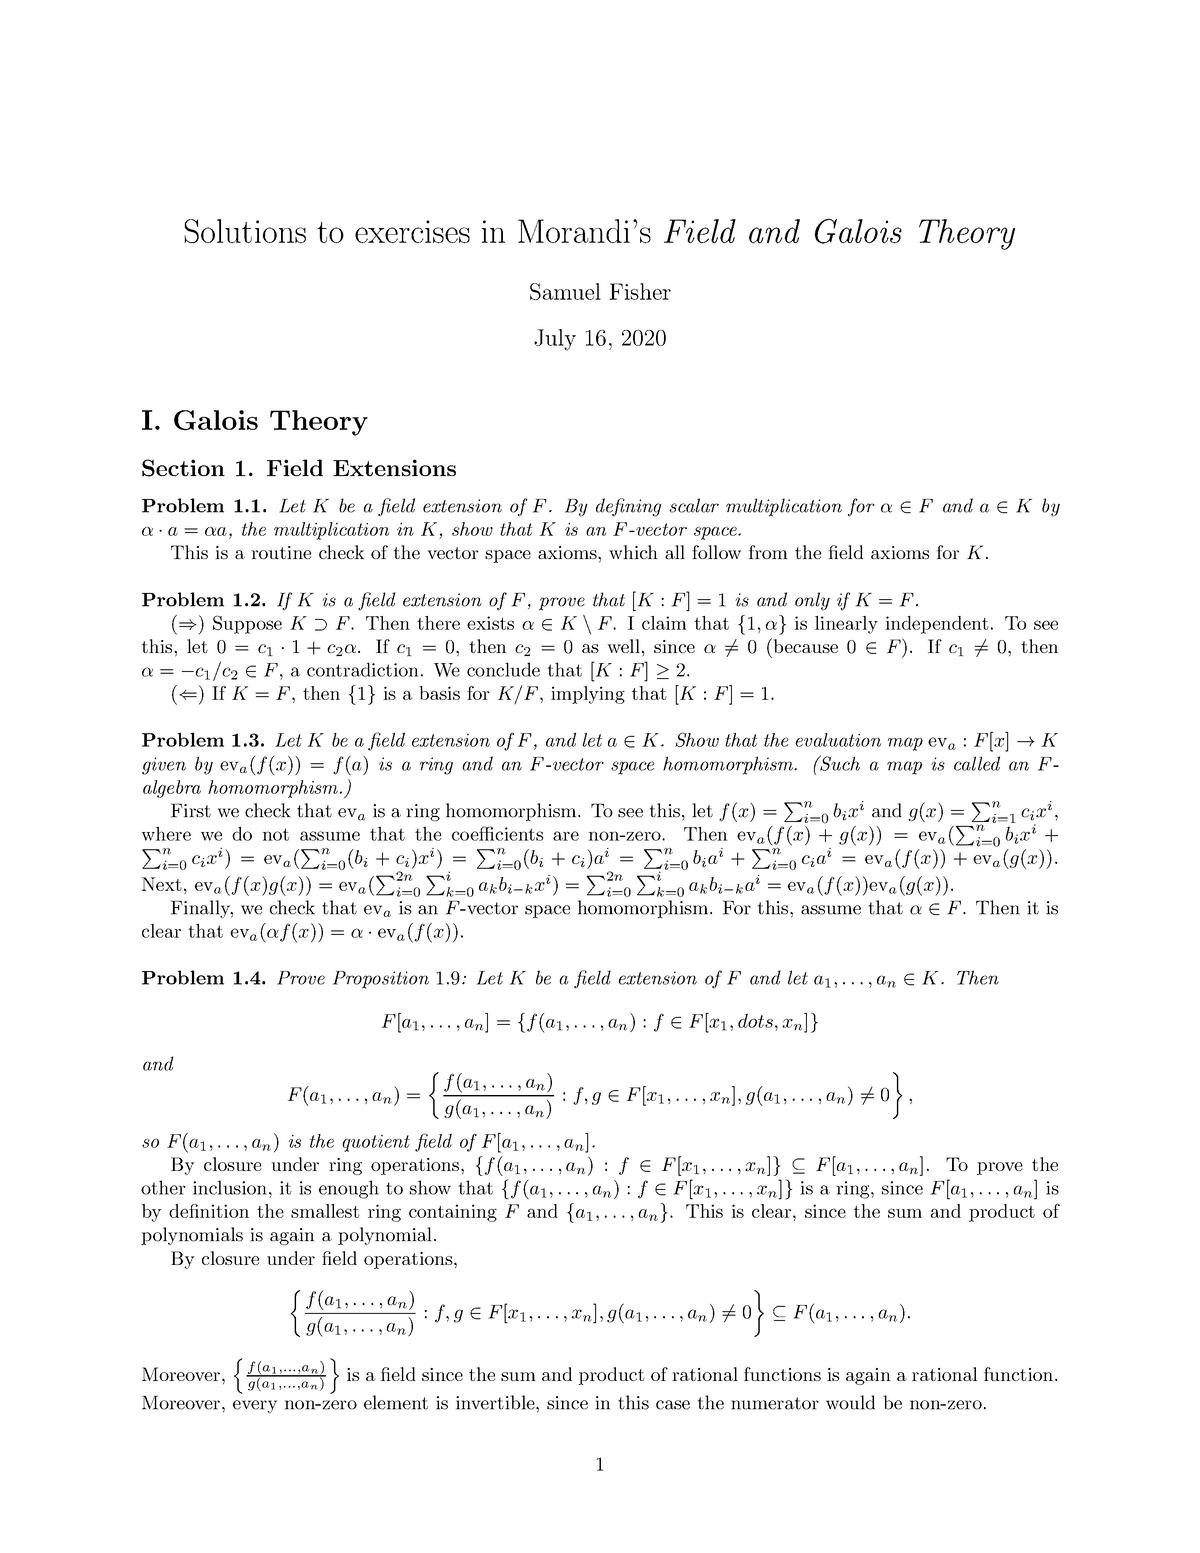 Field and Galois Theory Solutions - Patrick Morandi - Solutions to ...